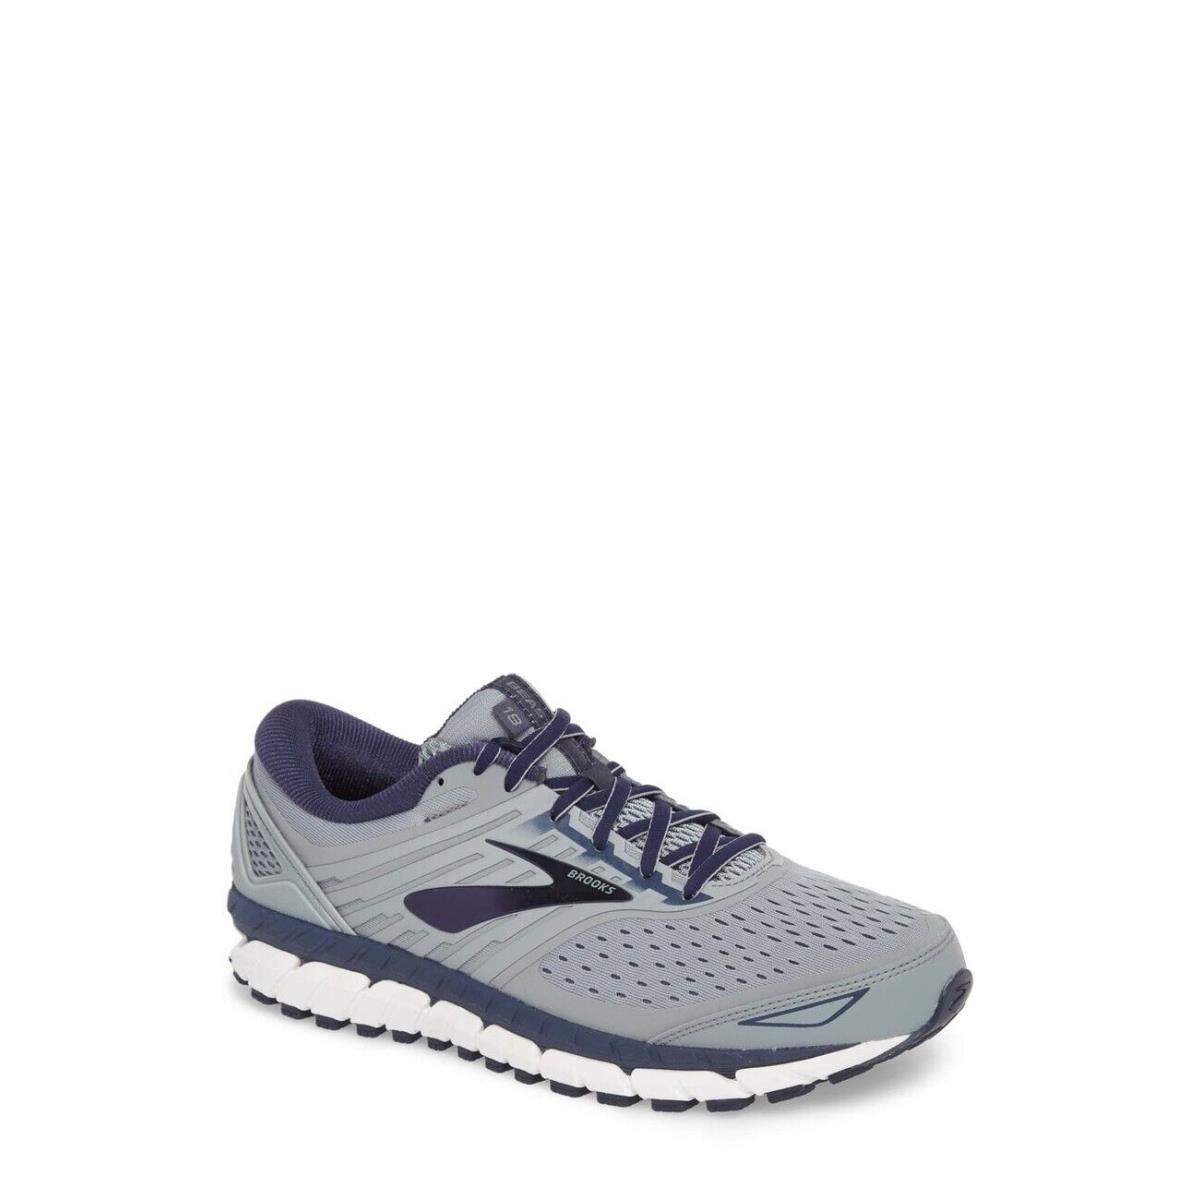 Brooks Mens Beast 18 1102821D015 Grey/navy/w Running Shoes Lace Up Size 15 D